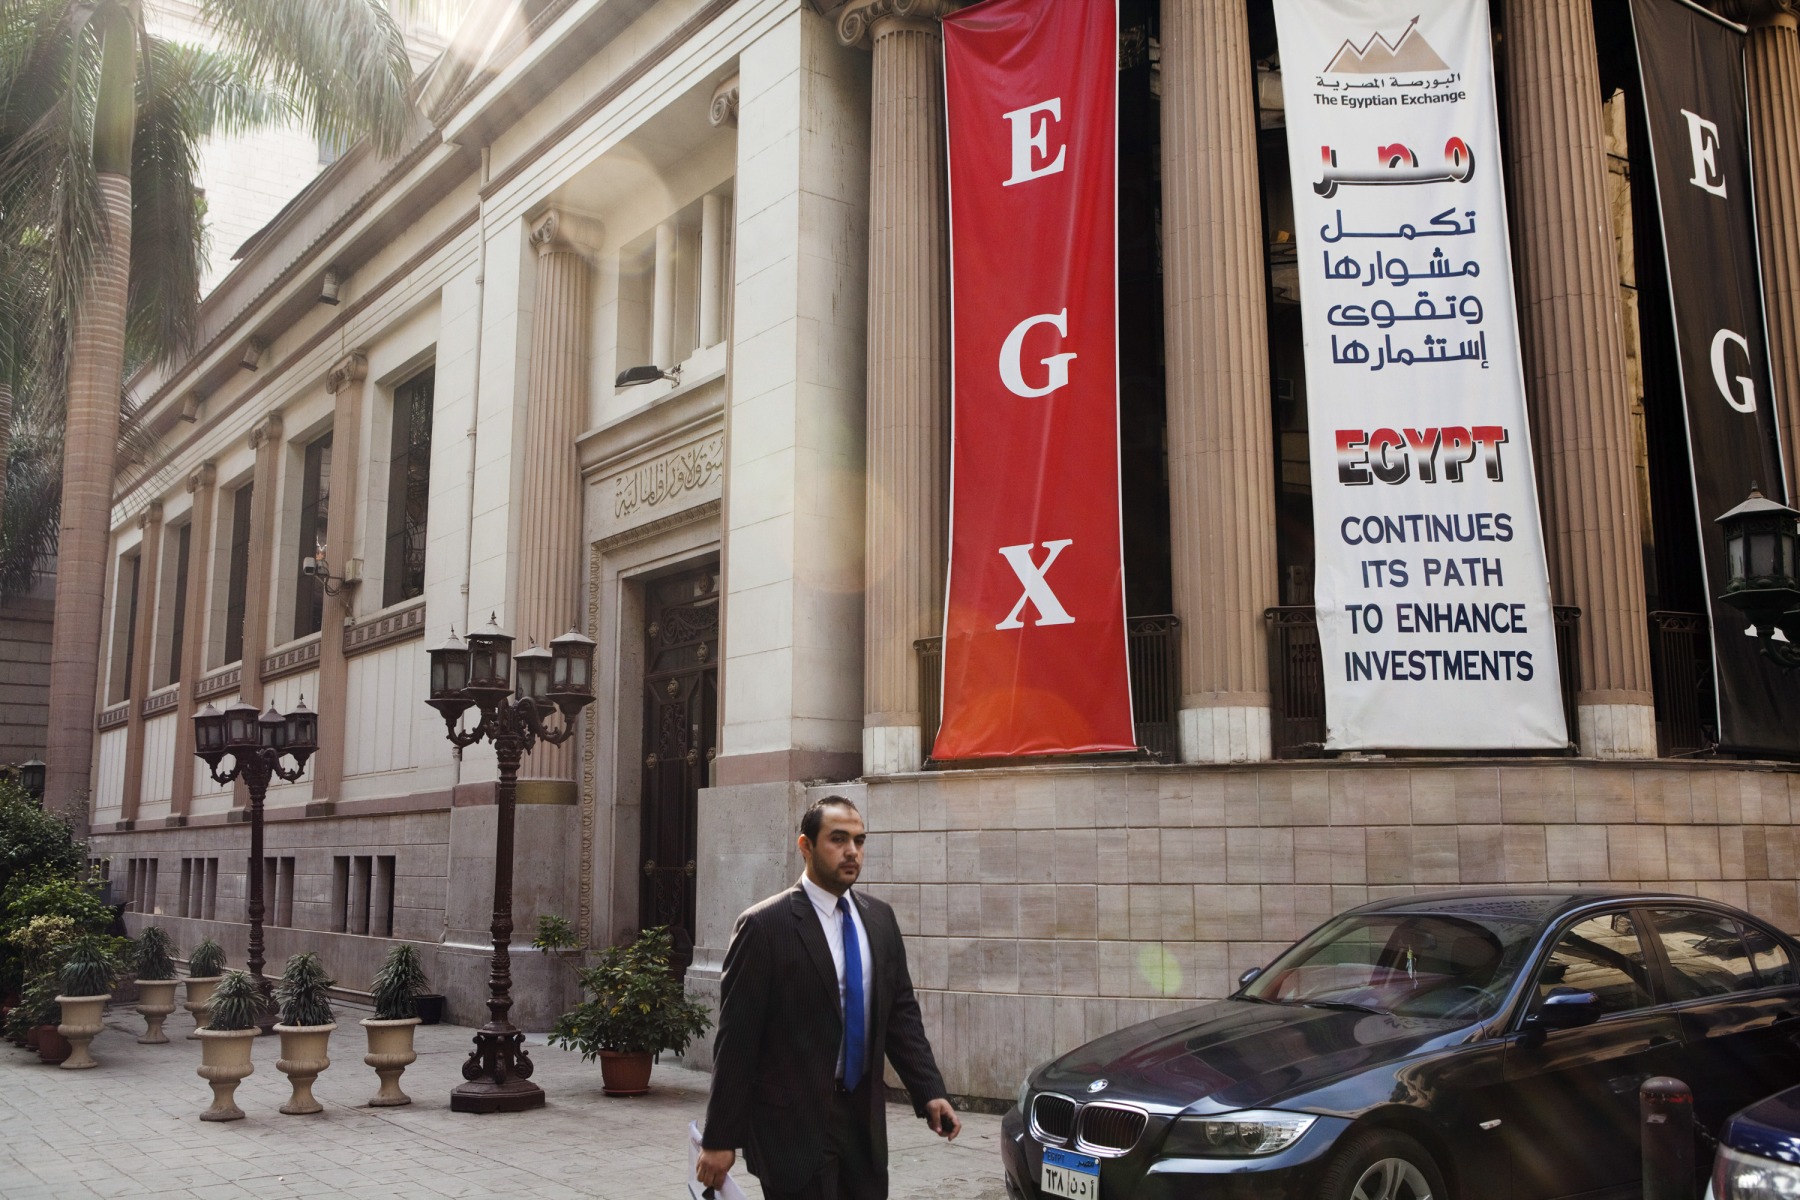 A pedestrian passes the entrance to the Egyptian stock exchange in Cairo, Egypt.